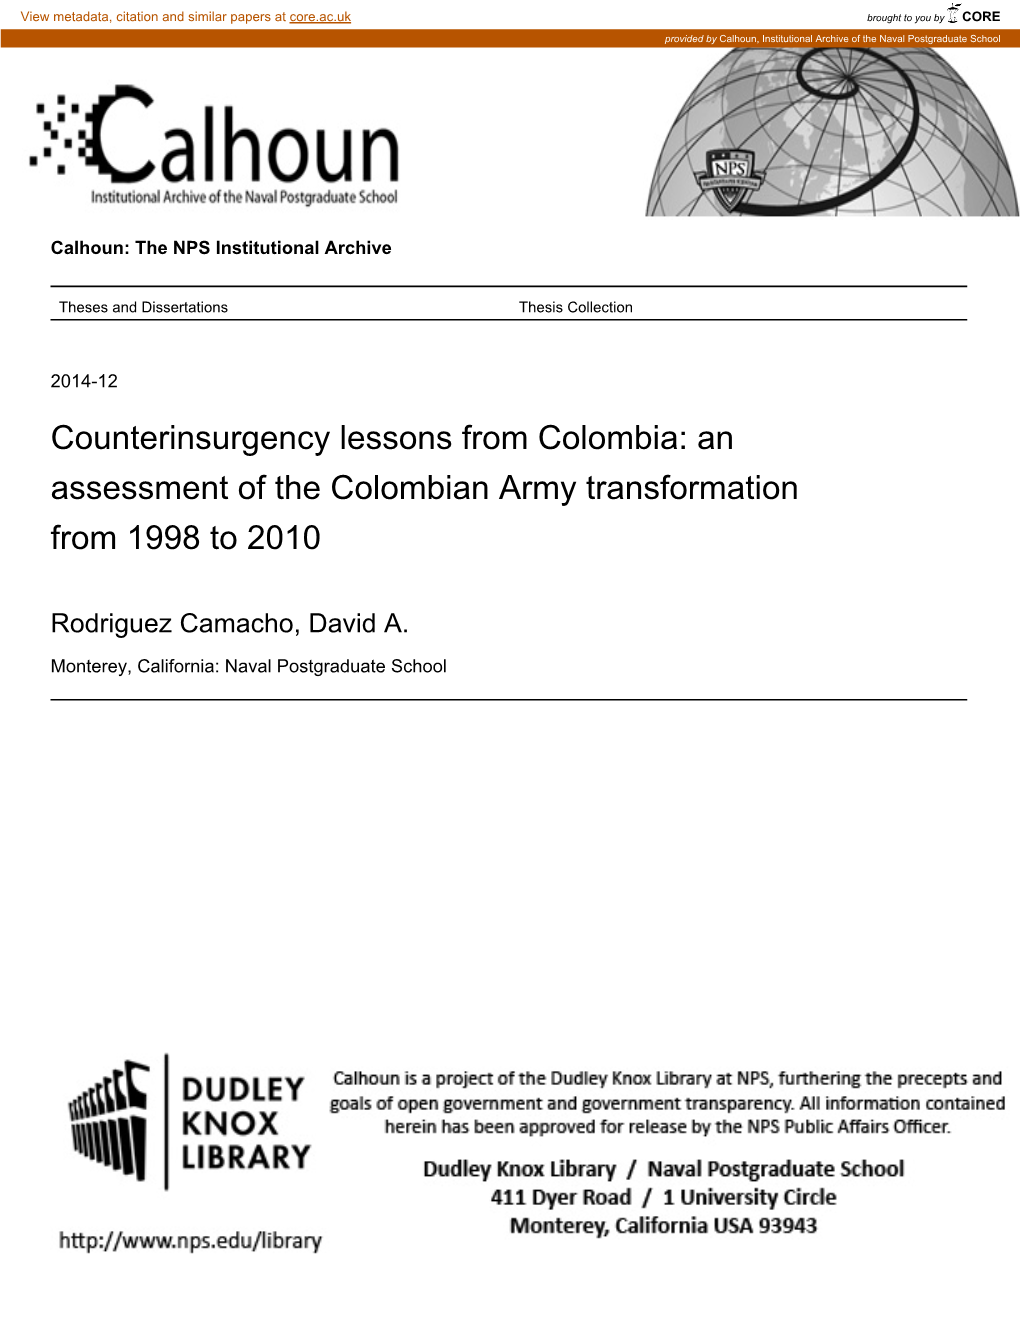 Counterinsurgency Lessons from Colombia: an Assessment of the Colombian Army Transformation from 1998 to 2010